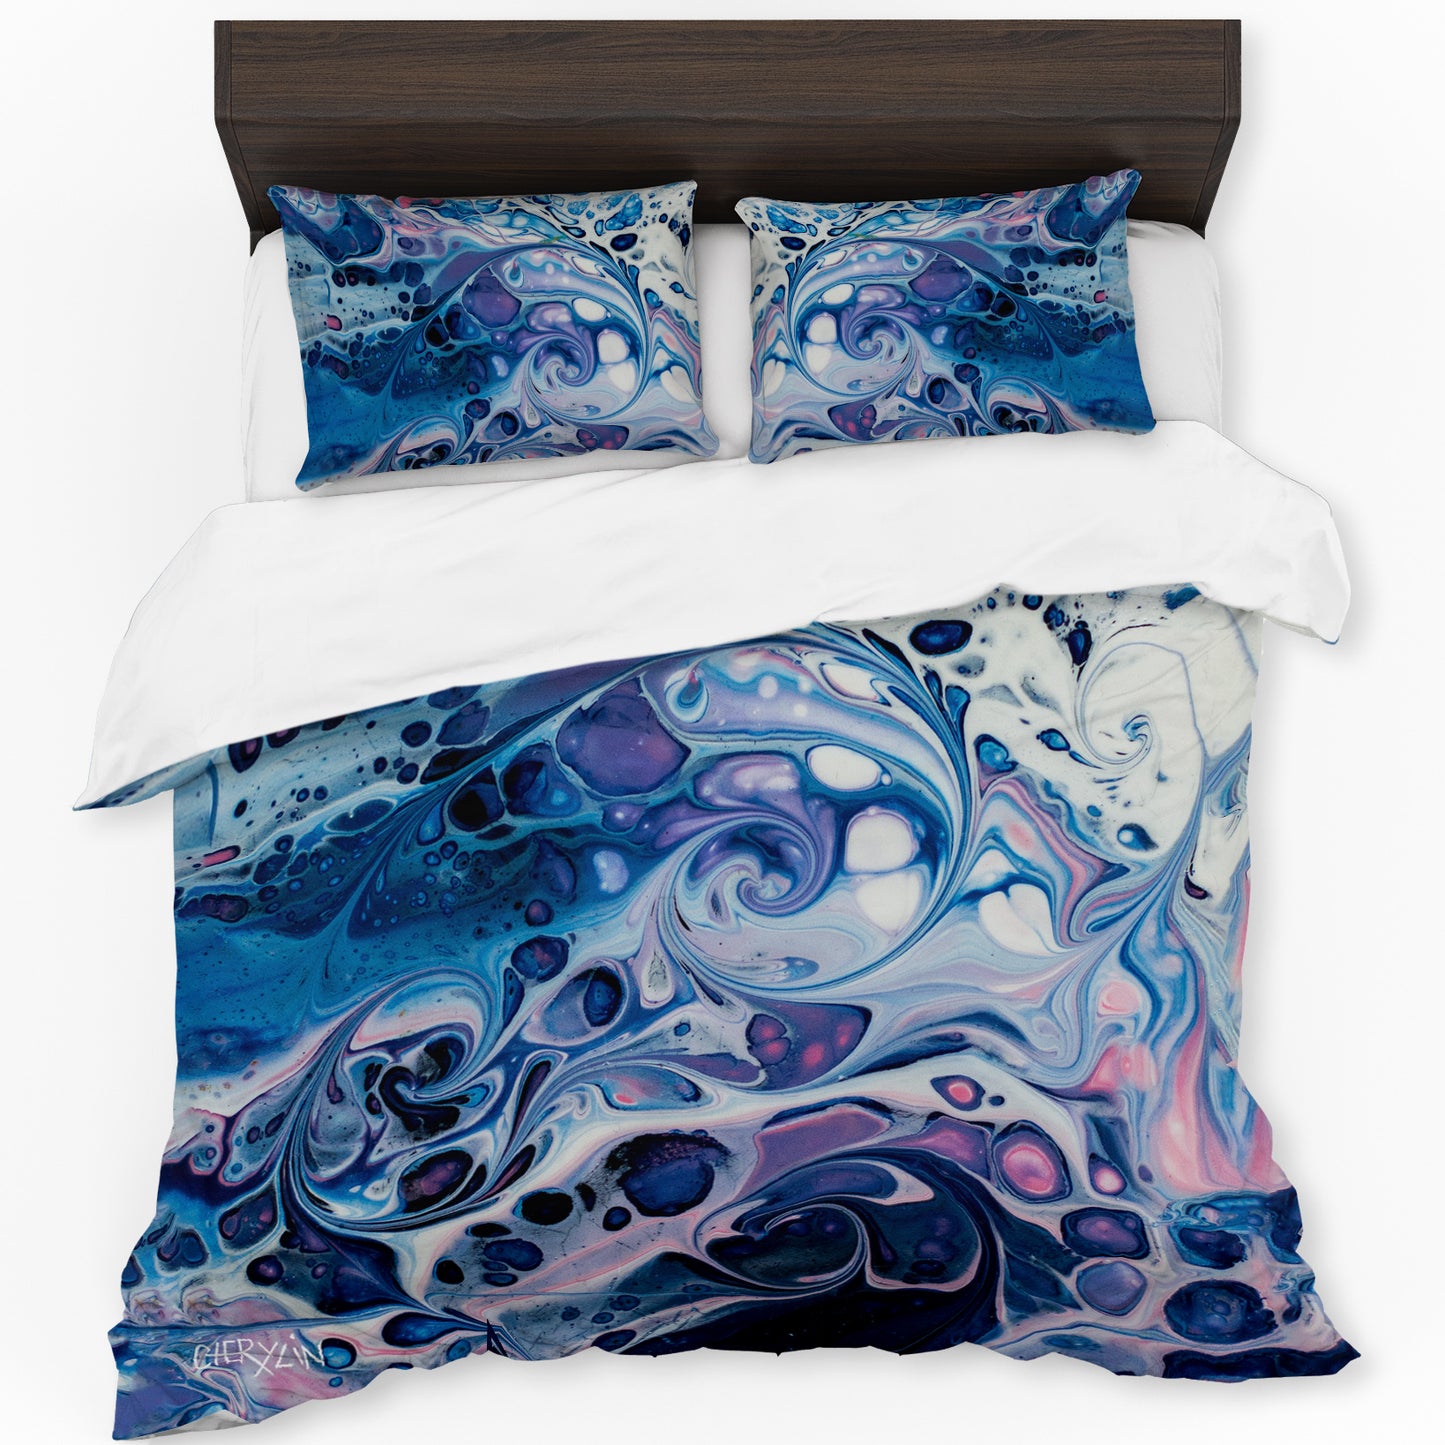 Cosmo By Cherylin Louw Duvet Cover Set